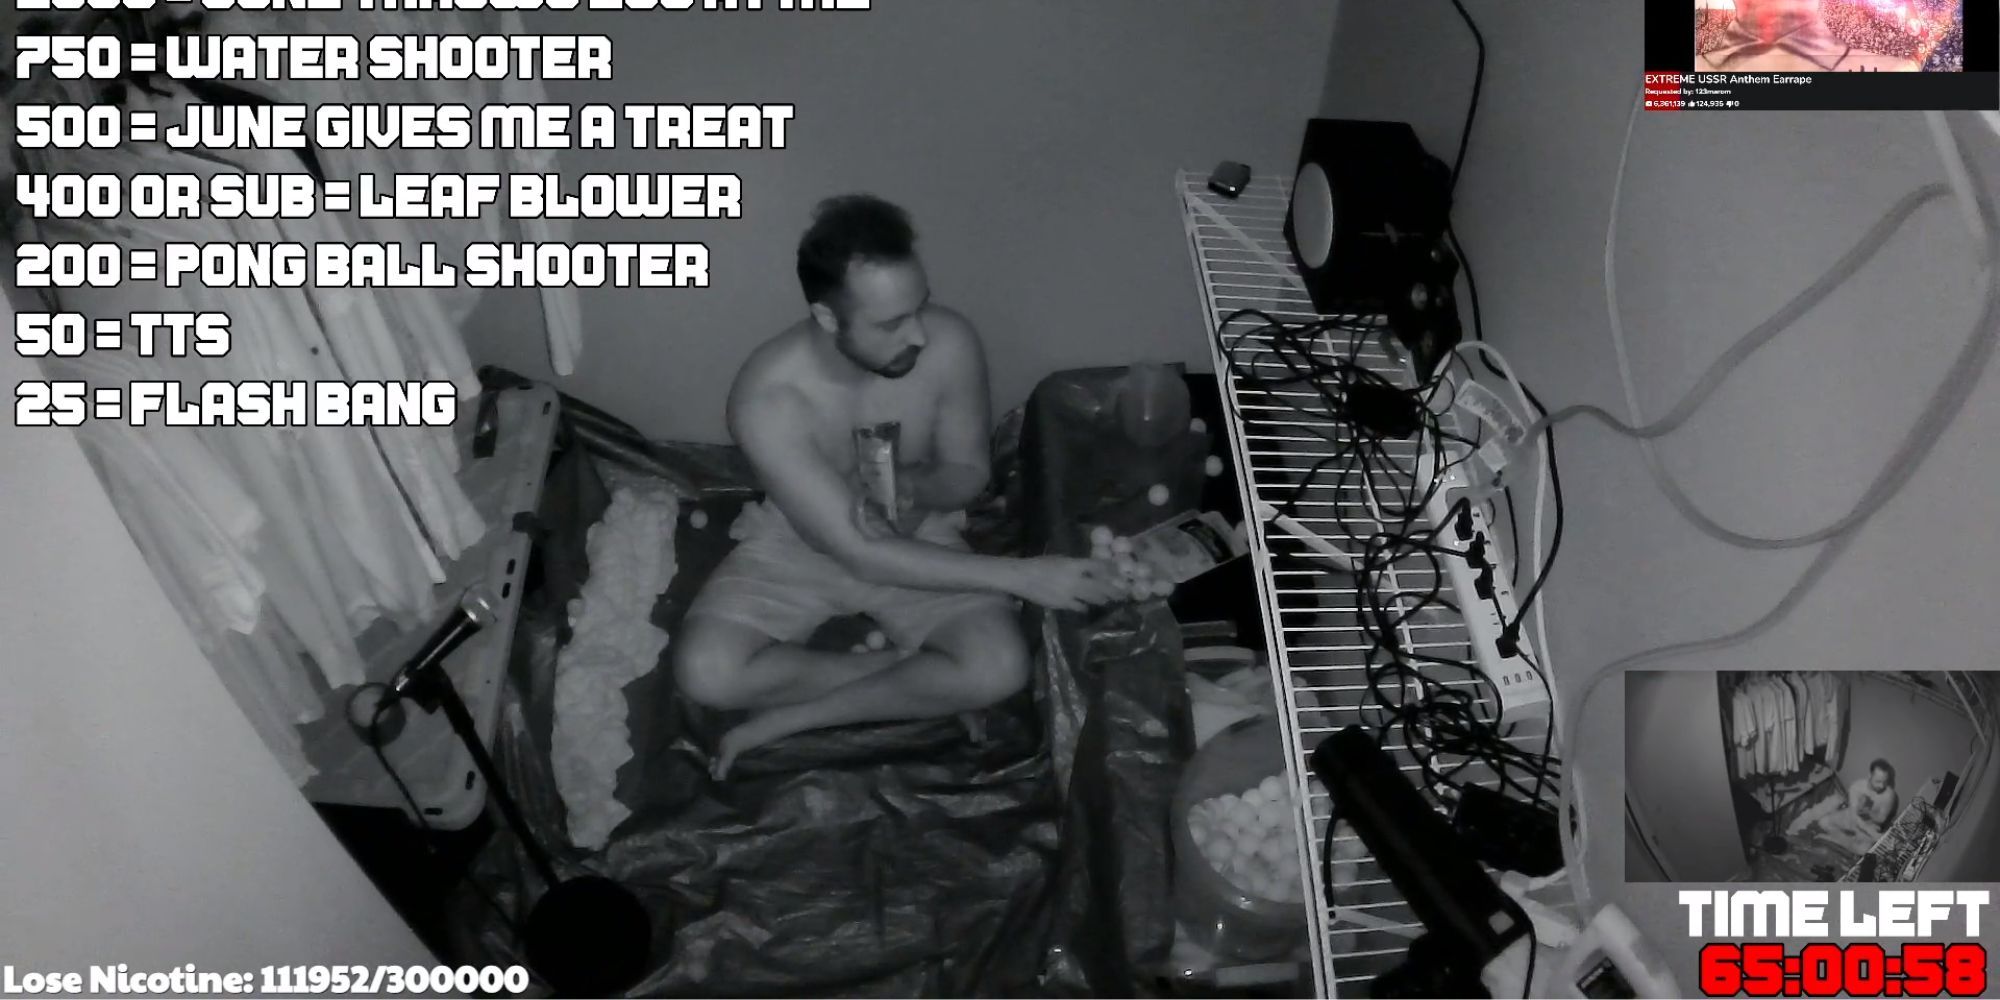 A man sits shirtless in a very small, dirty room. He seems to be eating something from a packet and is surronded by ping pong balls. The camera feed is in black and white. On the left hand side, there is a 